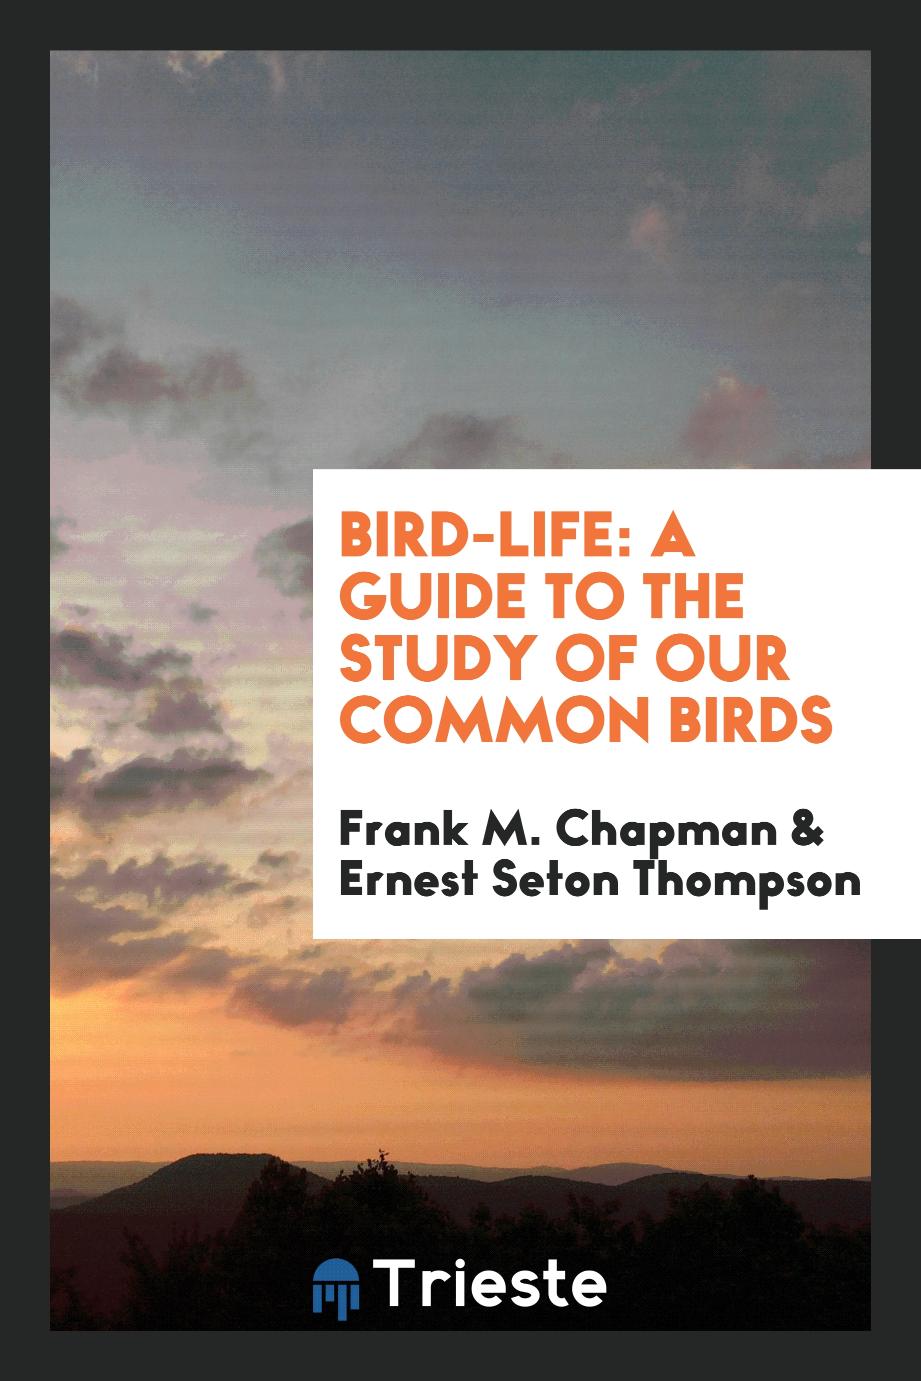 Bird-Life: A Guide to the Study of Our Common Birds